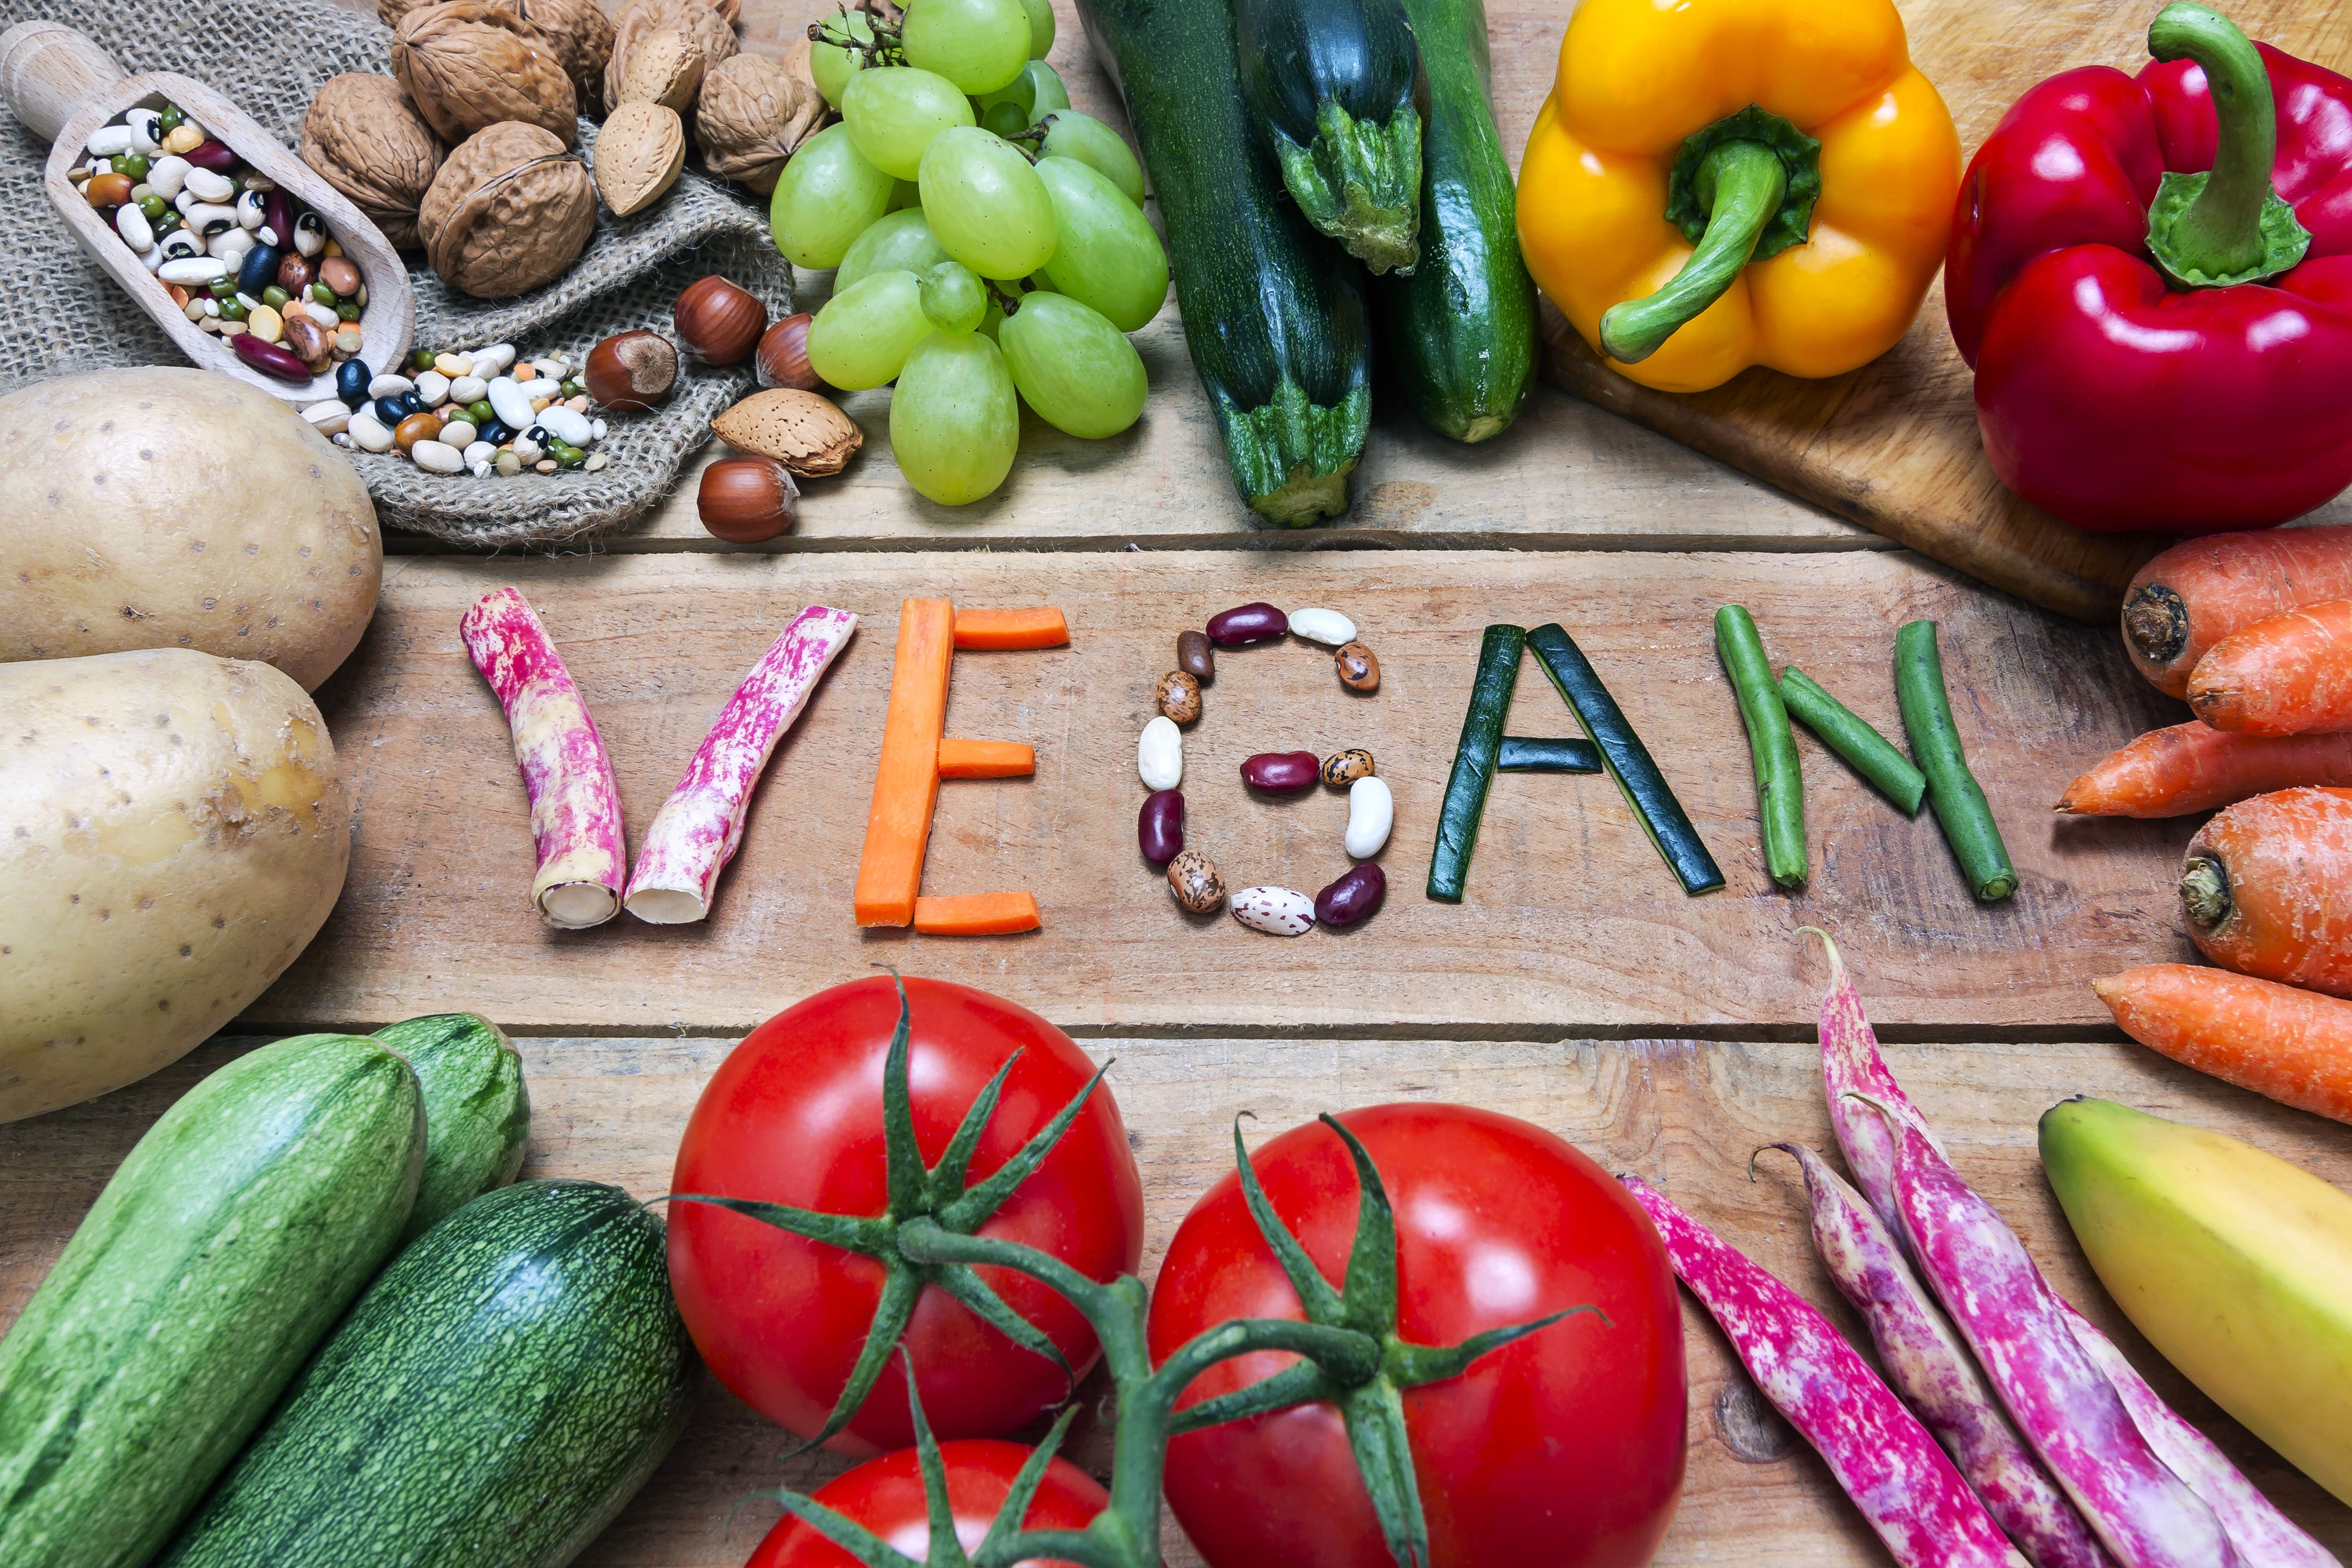 10 Things to Know Before Going Vegan